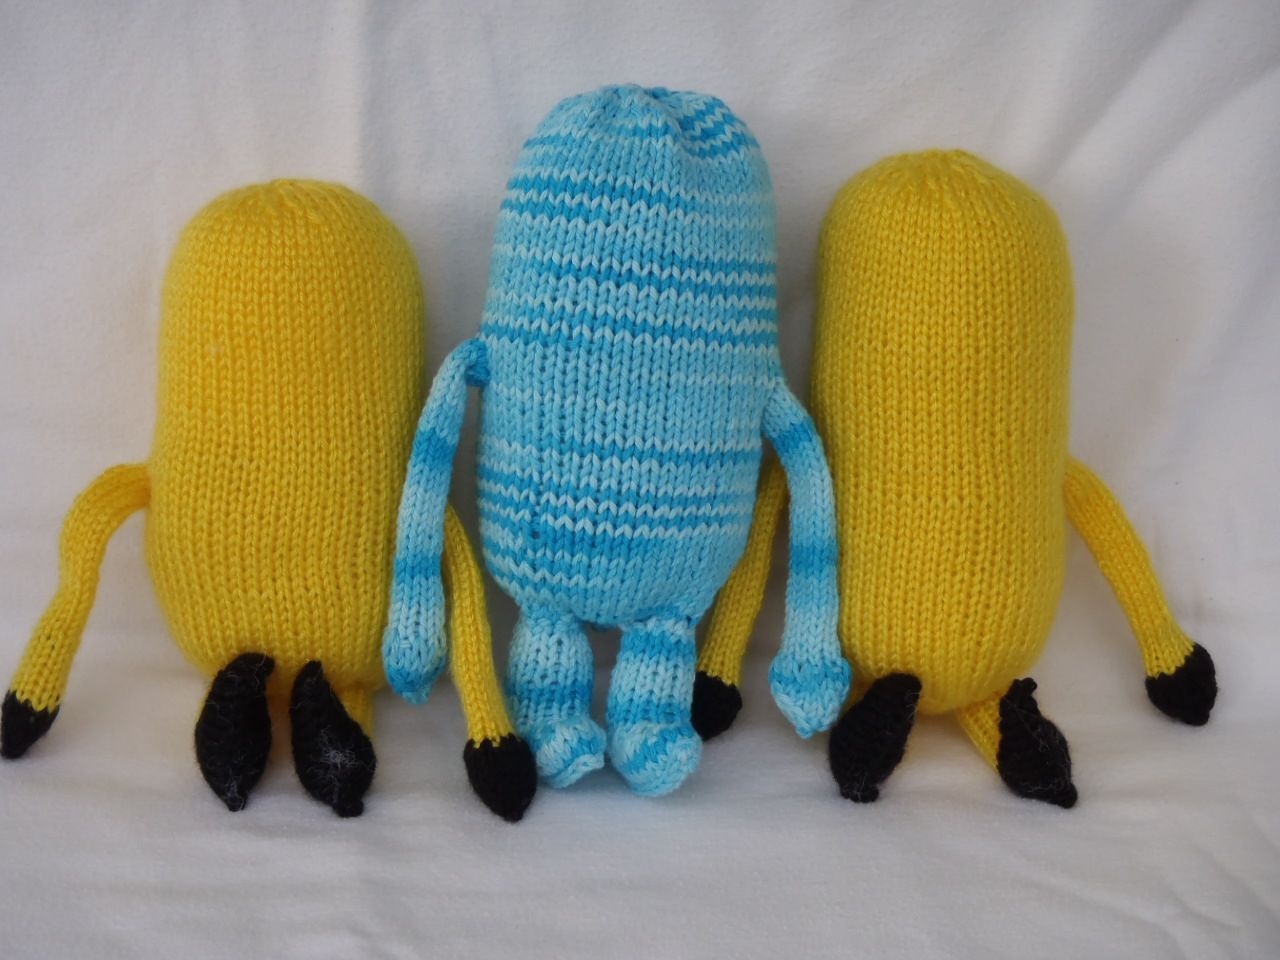 30+Great Photo of Knitting Patterns For Minions #minionpattern Knitting Patterns...